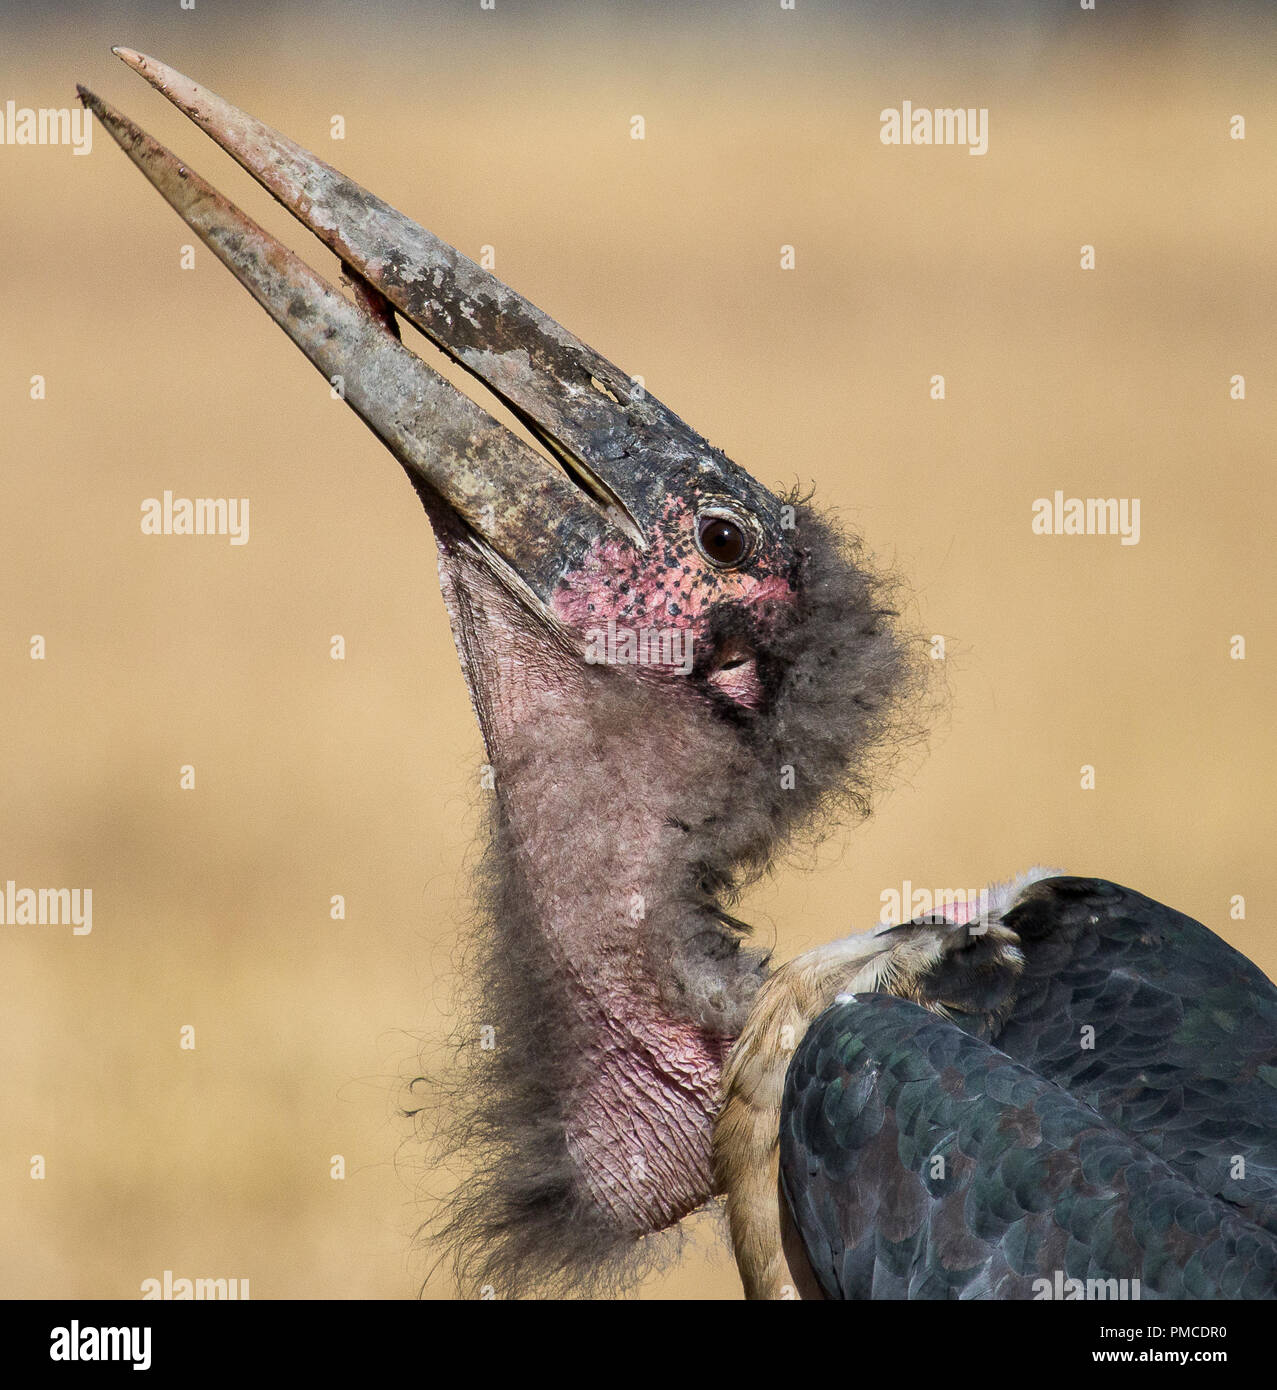 Portrait of a marabou stork photographed in South Africa Stock Photo